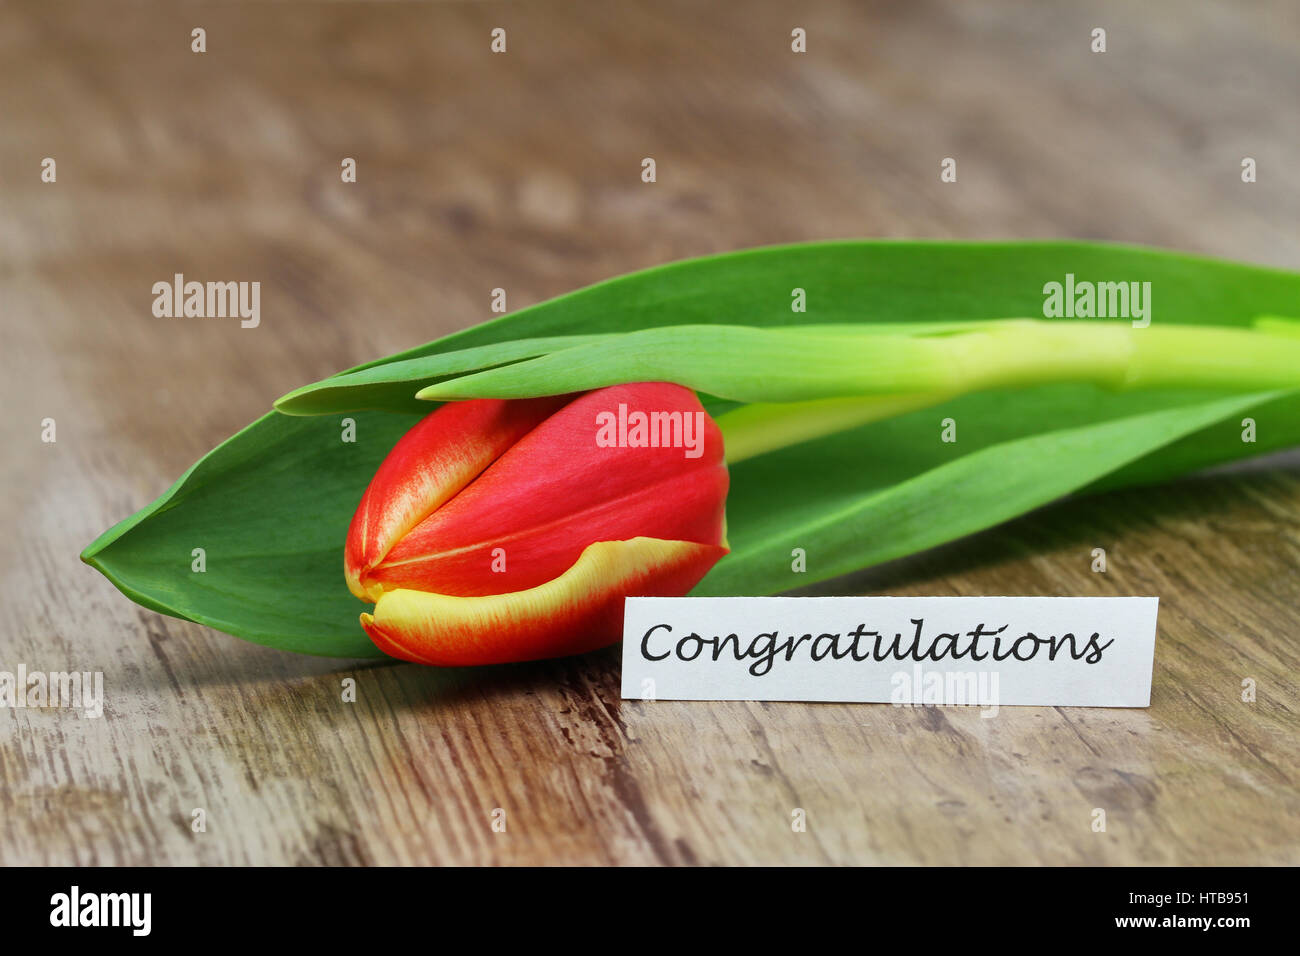 Congratulations card with red and yellow tulip on wooden surface Stock Photo